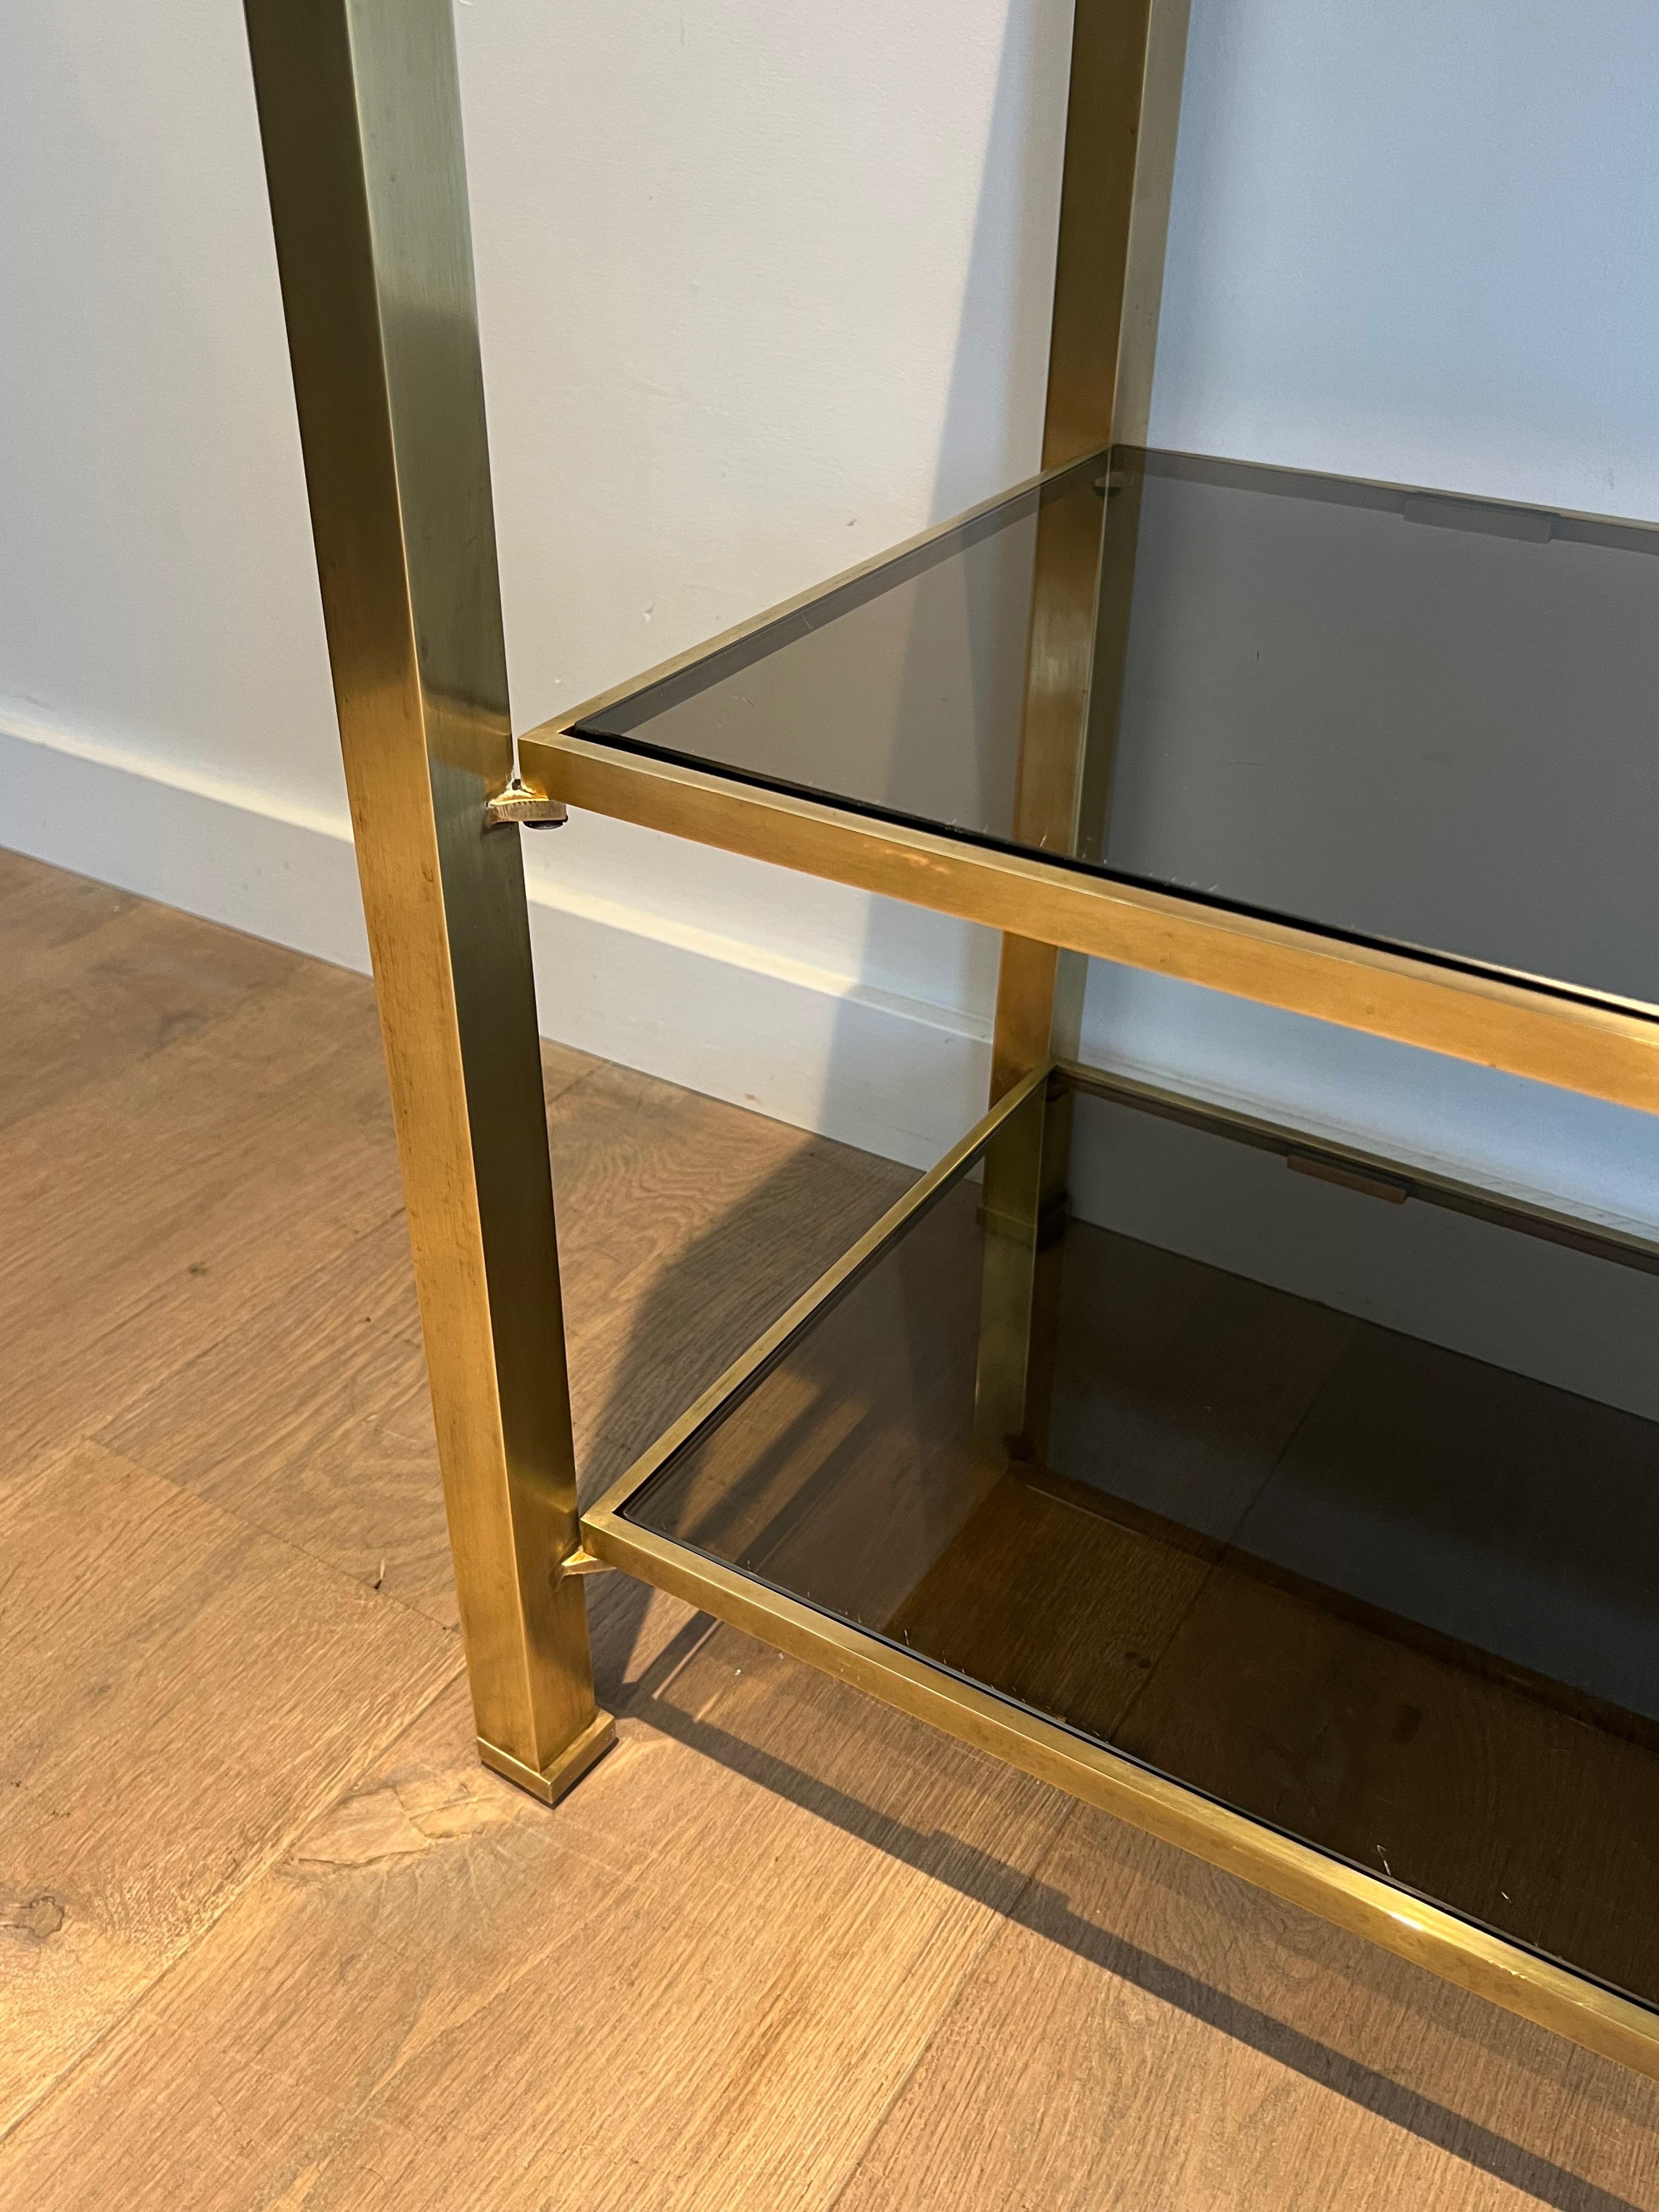 Mid-20th Century Brass Console Table by Guy Lefèvre for Maison Jansen. Circa 1970